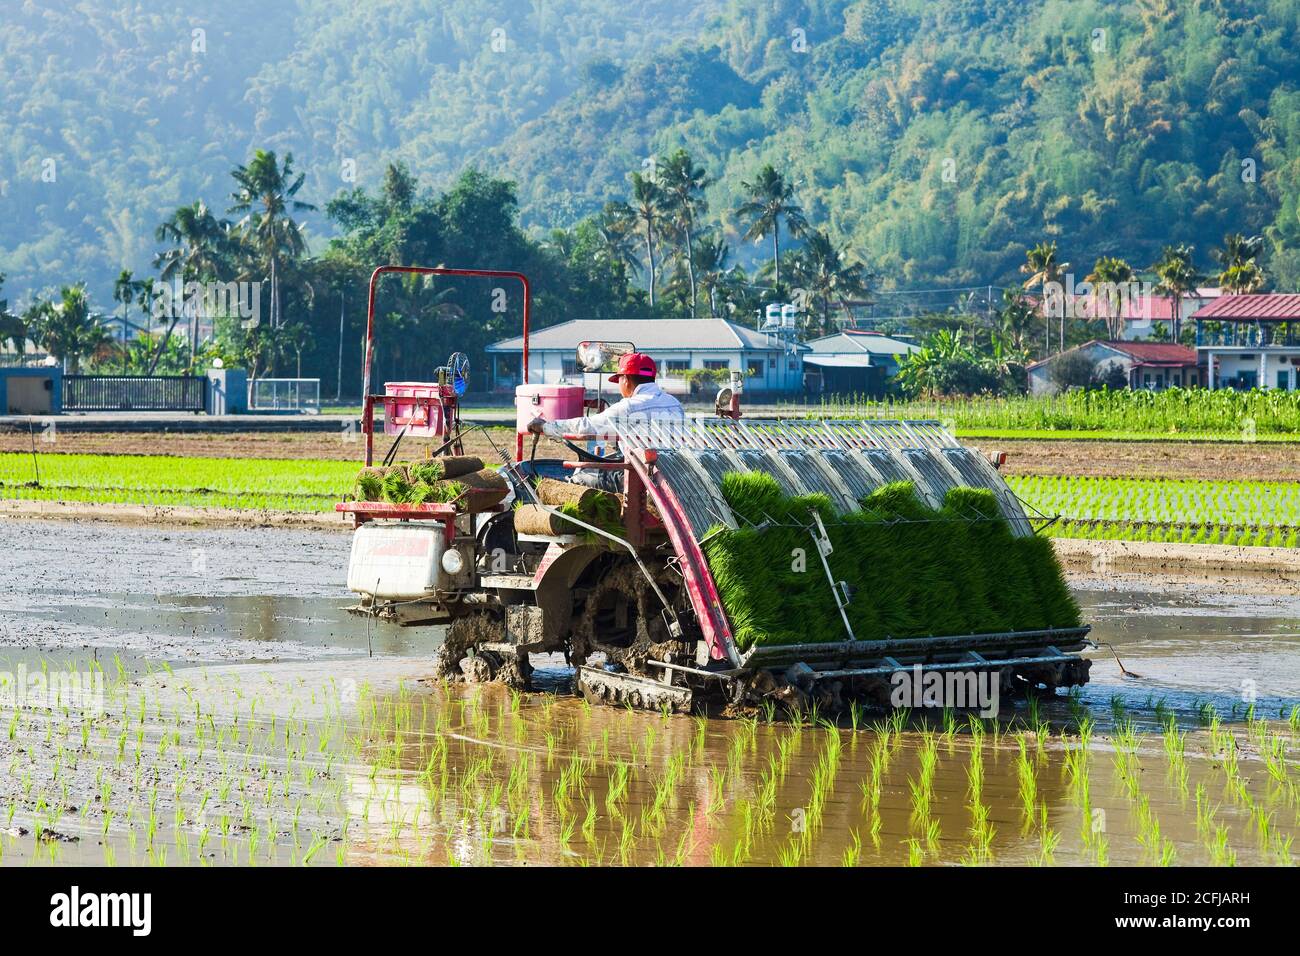 Farmers use transplant rice seedlings machine in the paddy field. Stock Photo